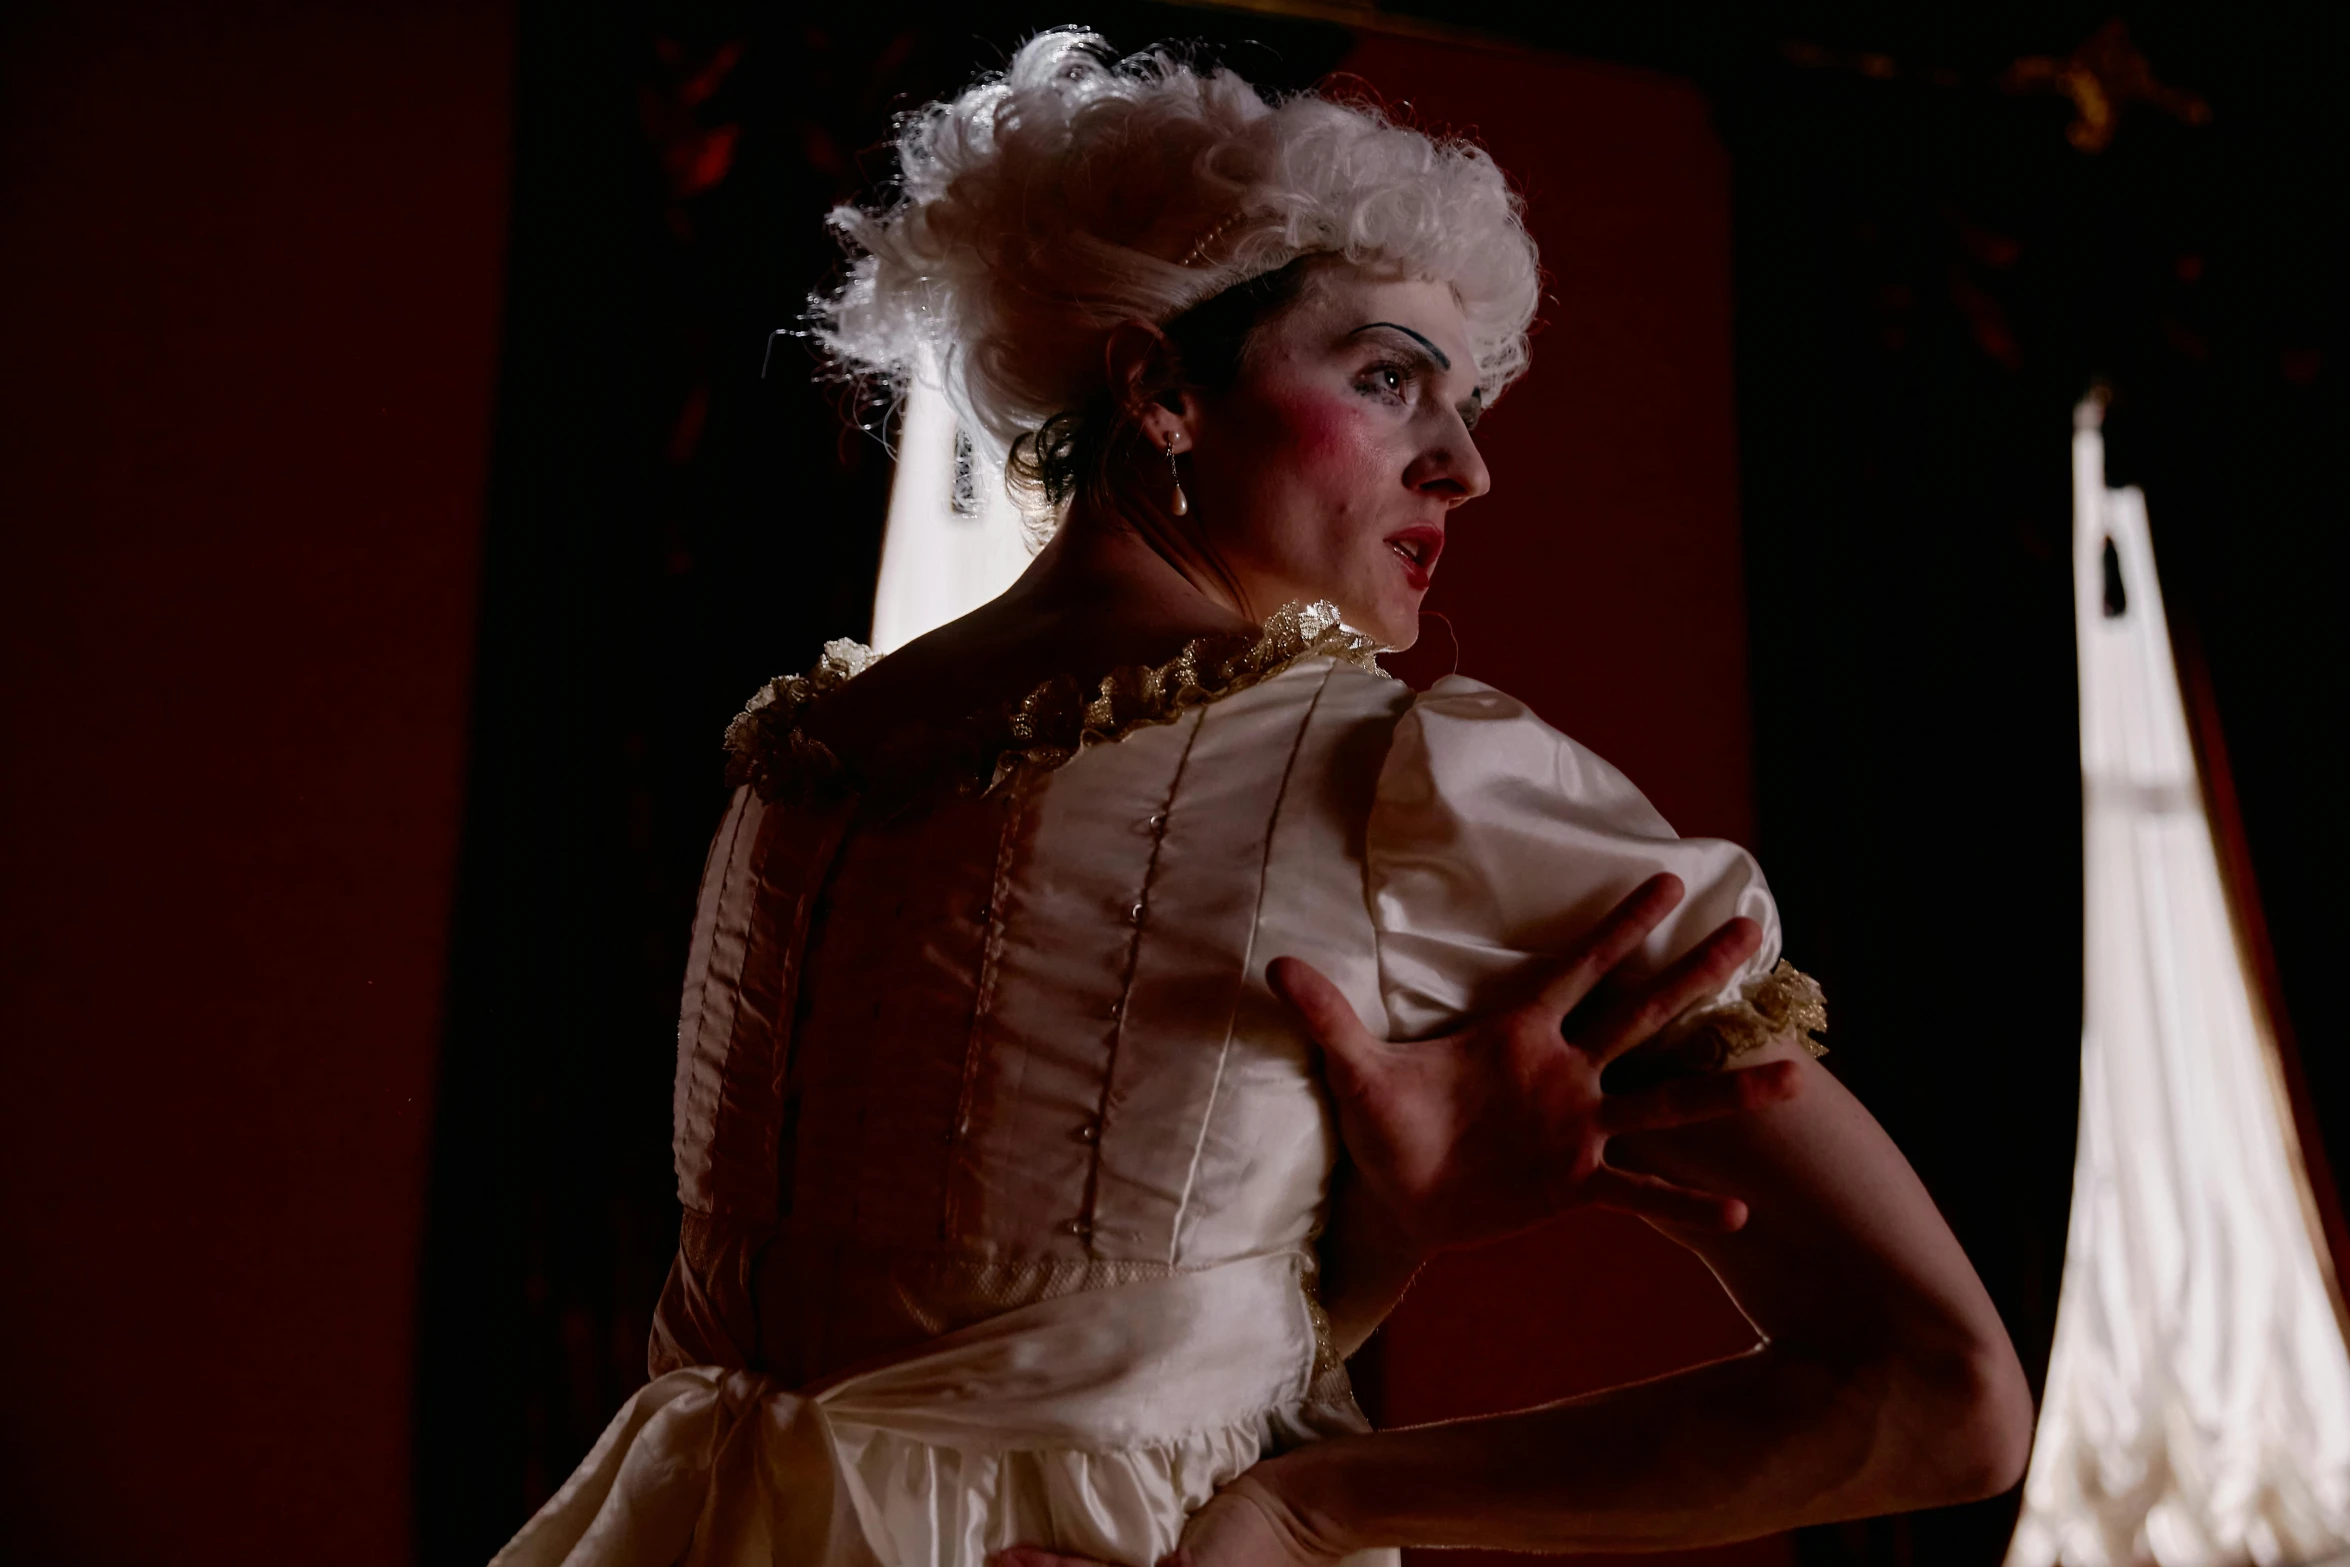 a woman in a white dress posing for a picture, inspired by Karl Bryullov, rococo, filmstill, drag, standing in a dimly lit room, performance